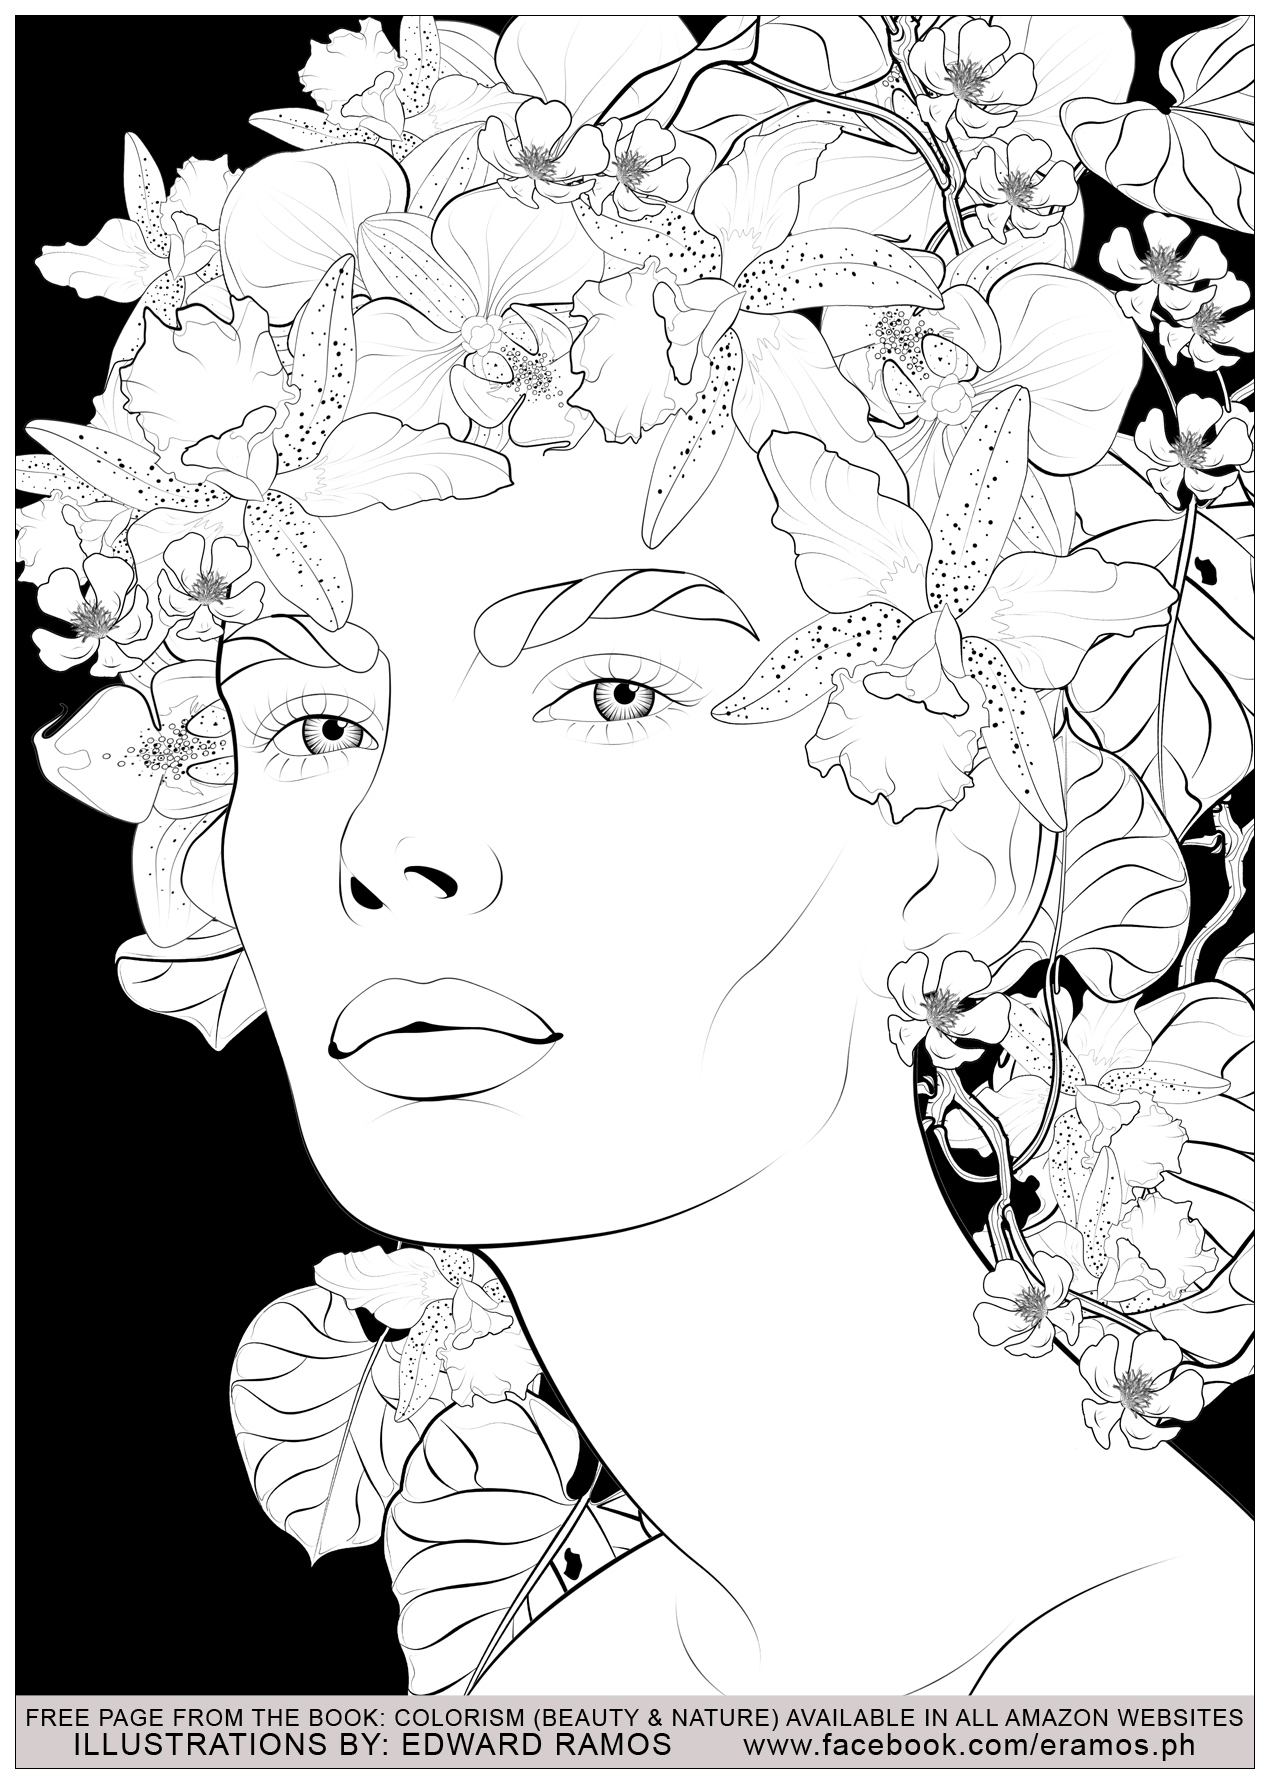 Illustration from the book Colorism - Beauty & Nature by Edward Ramos - 11